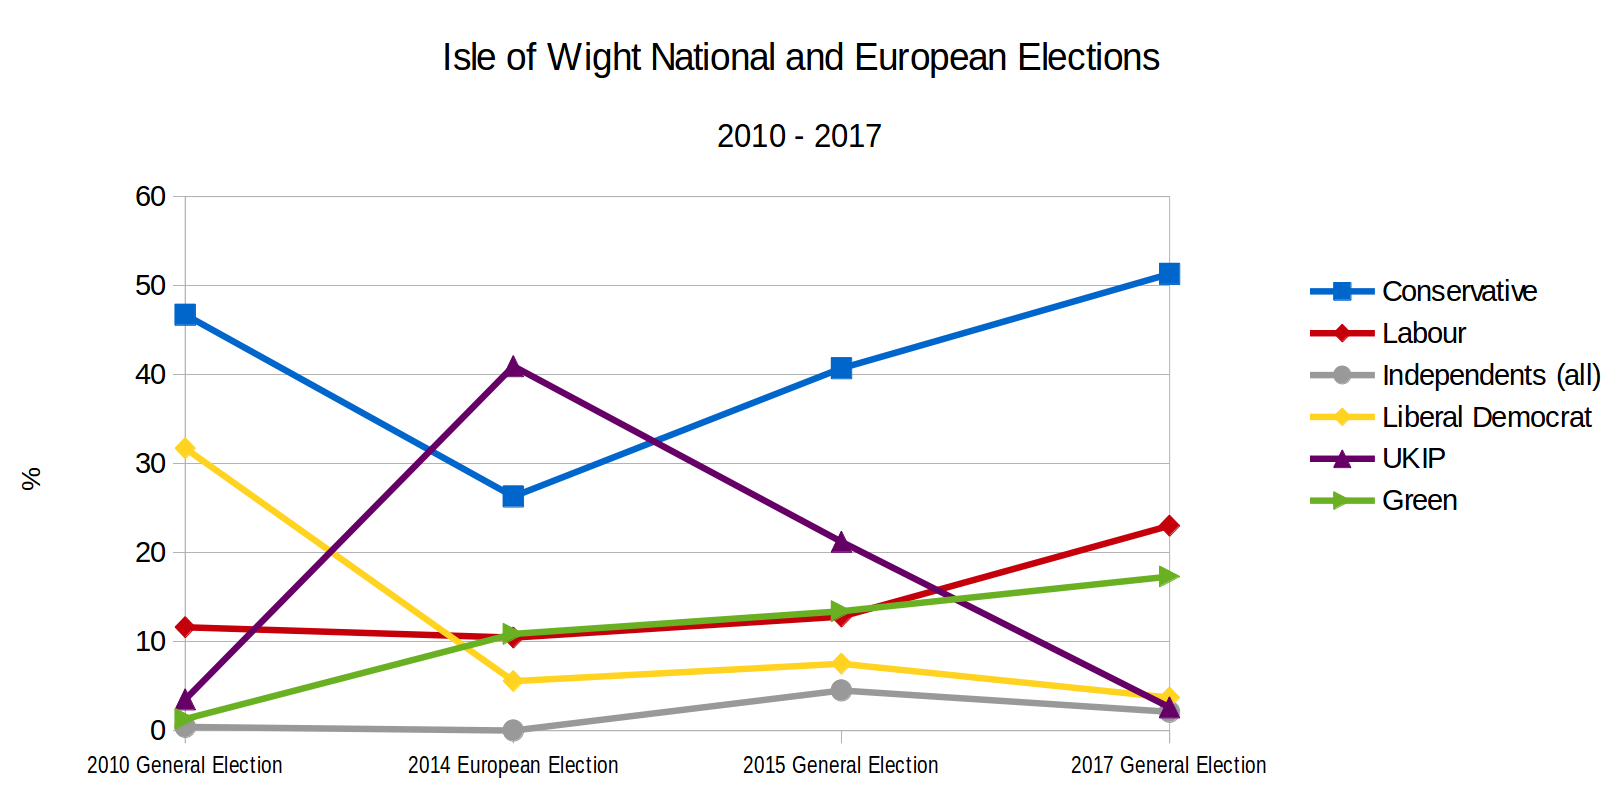 Isle of Wight National and European Elections graph, 2010-2017